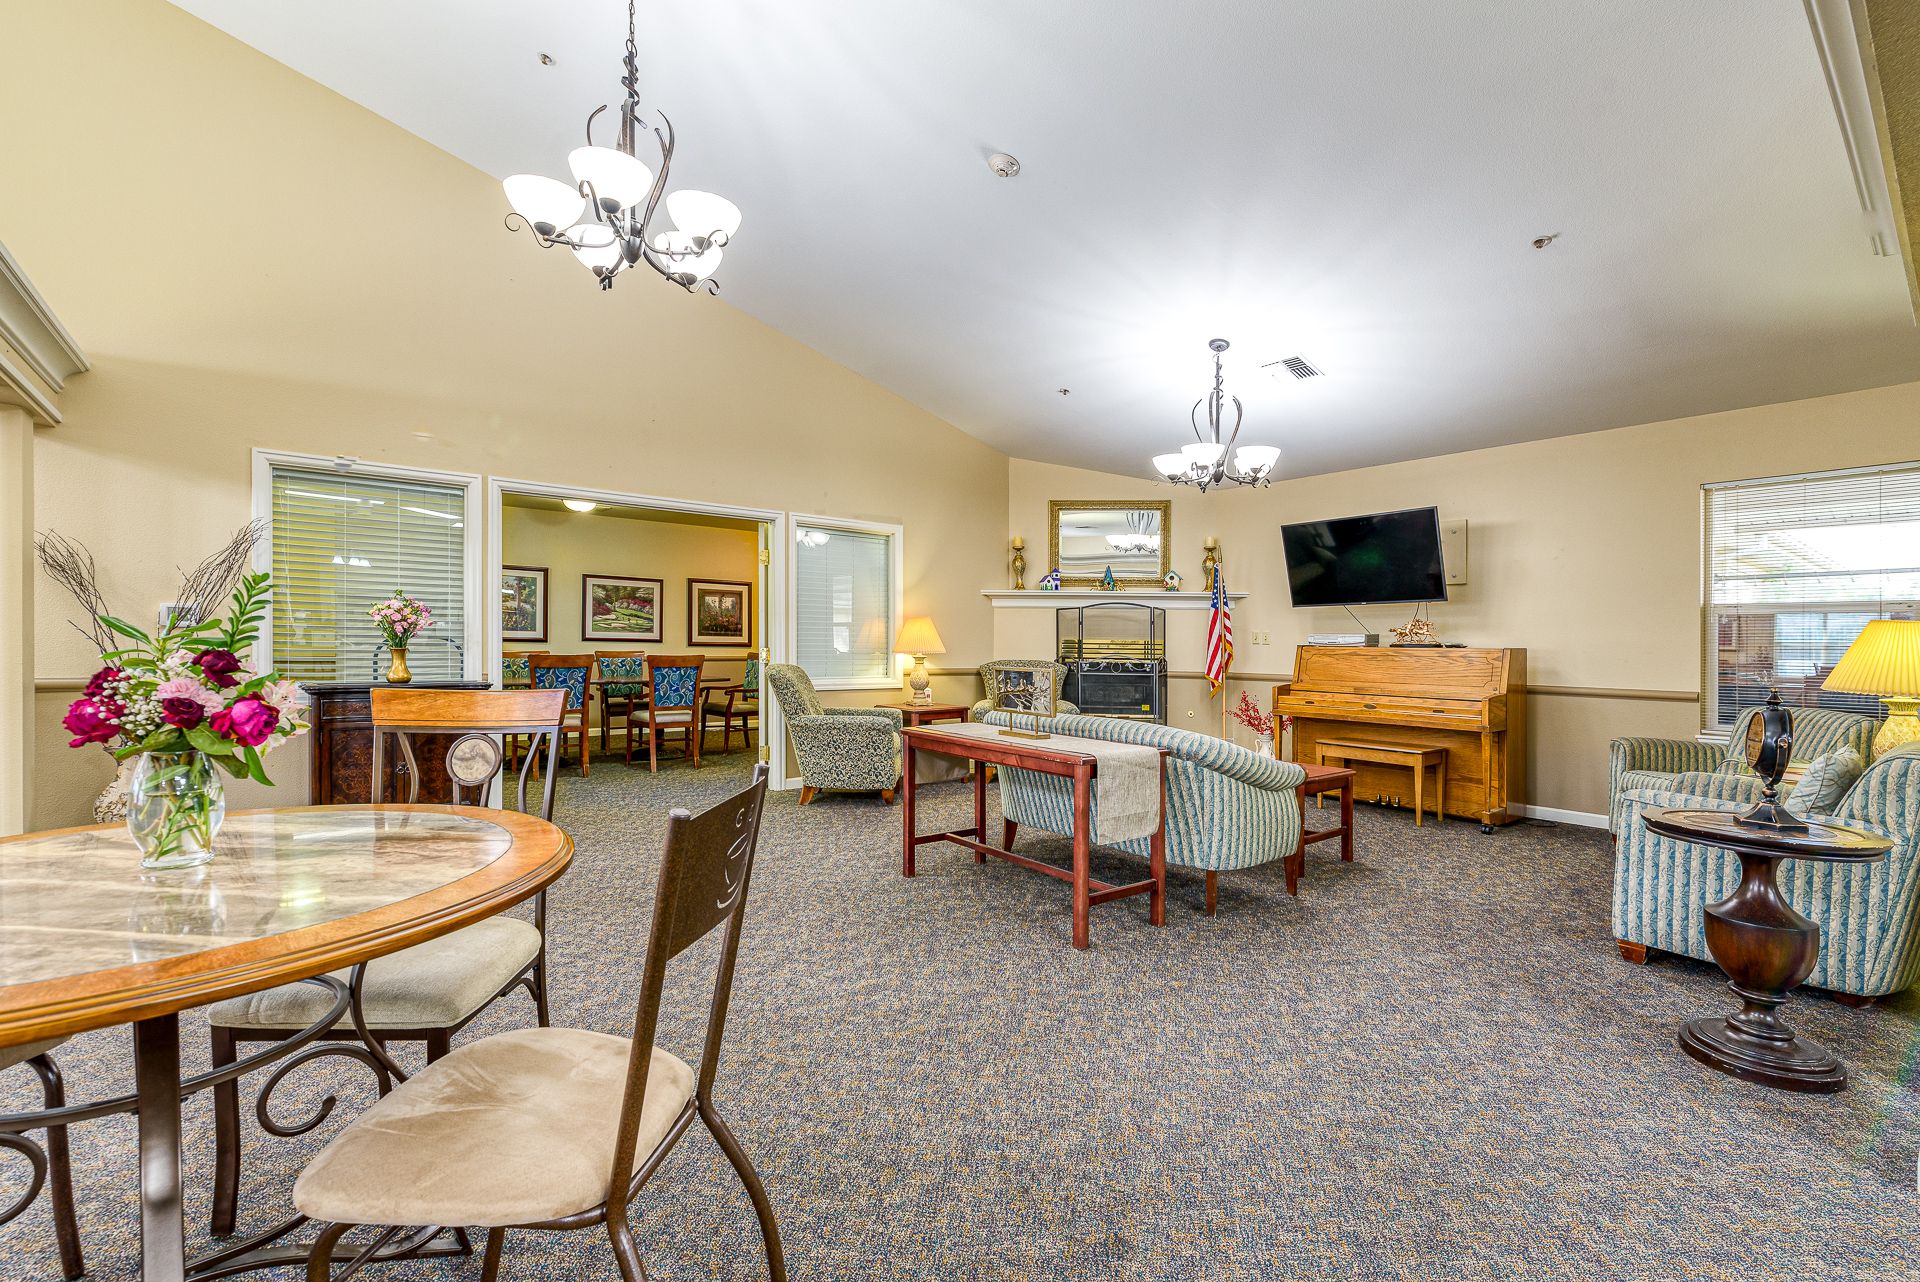 Awbrey Place Assisted Living and Memory Care 5